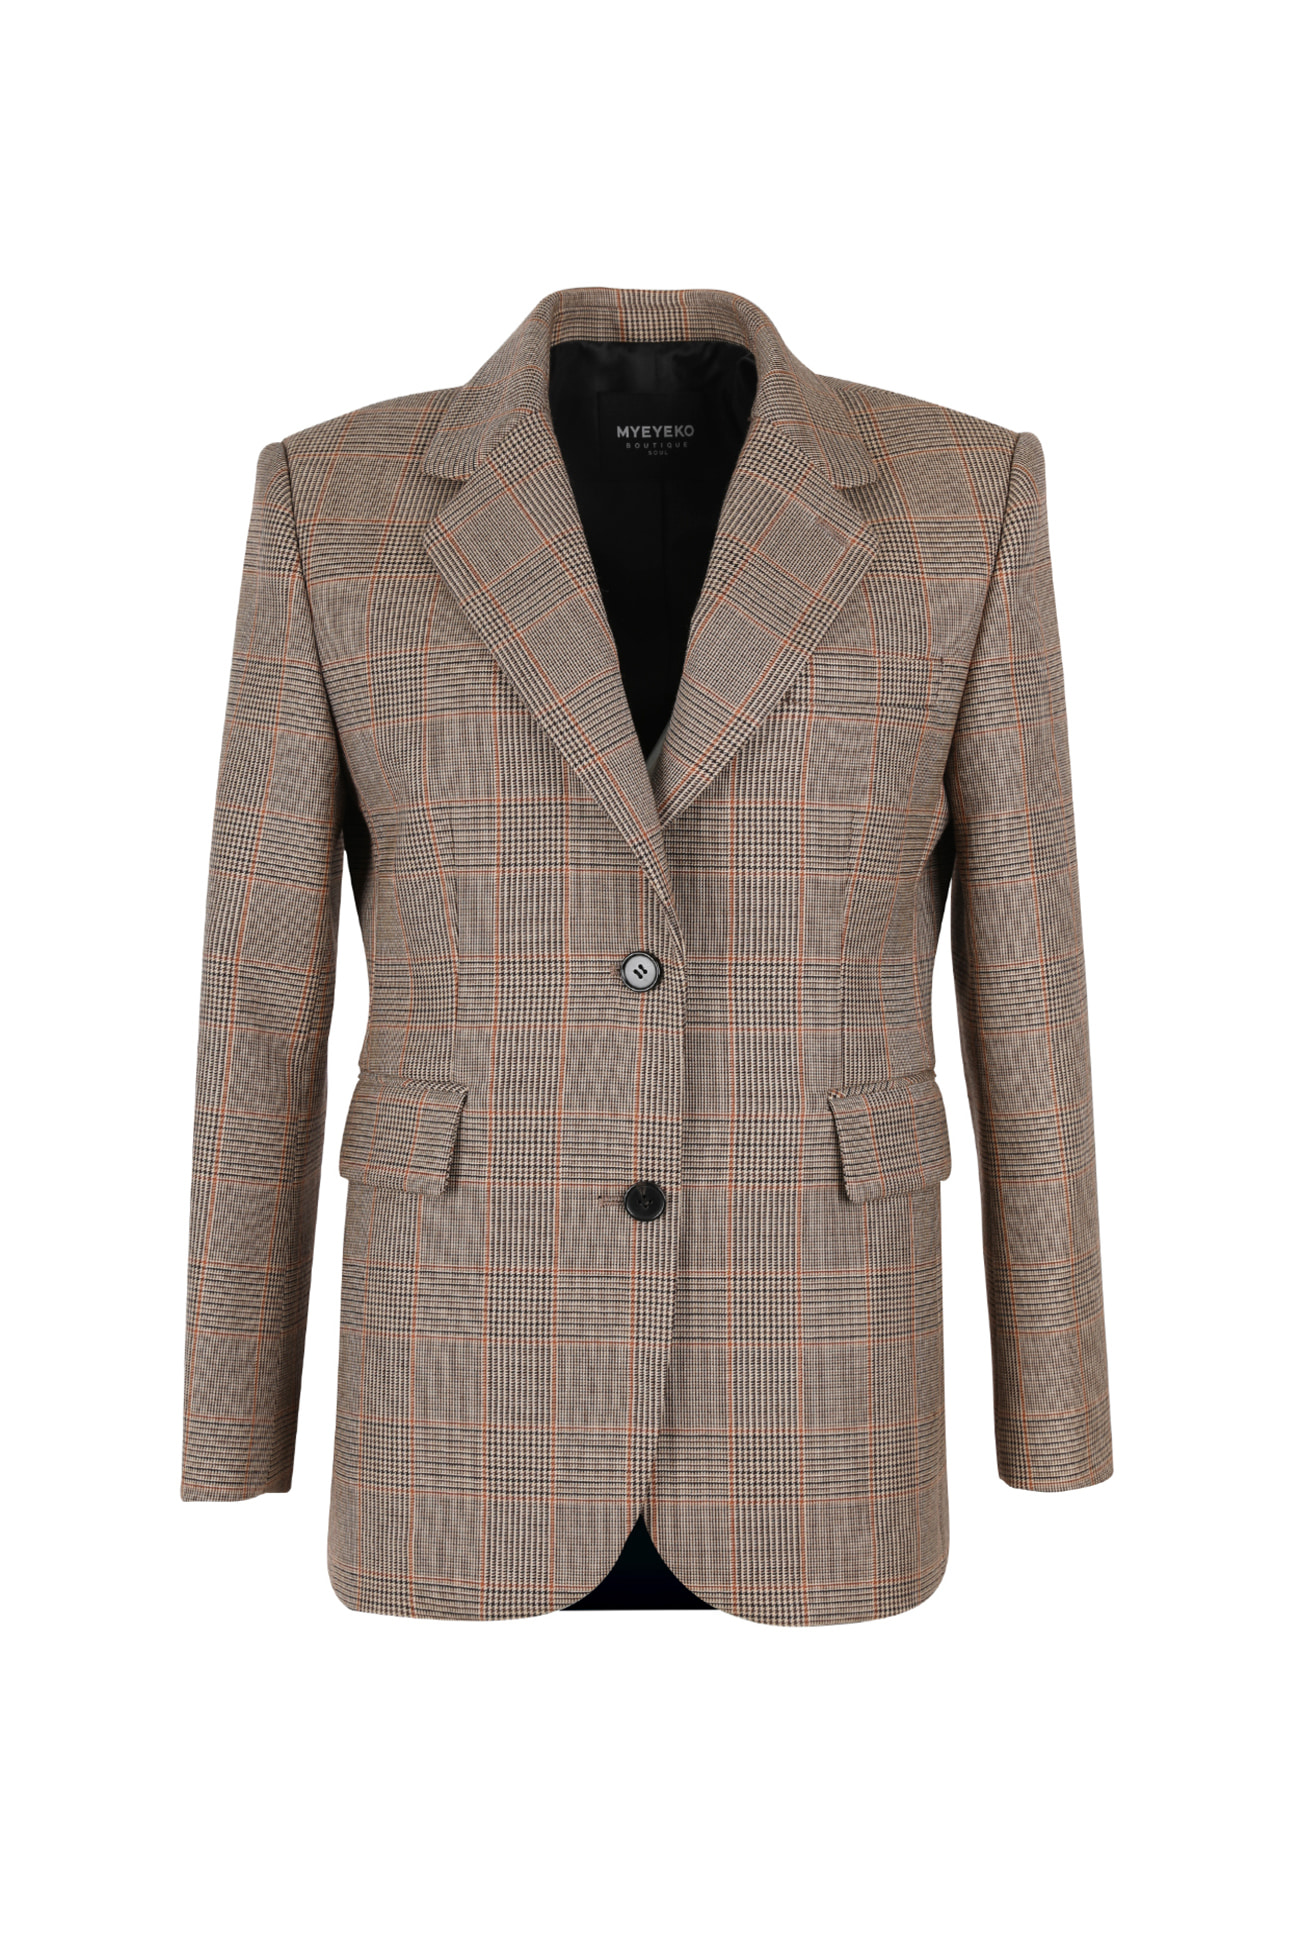 HIGH QUALITY LINE - Classic Moon Tweed Wool Jacket (Fabric by Abraham Moon, Made in ENGLAND)